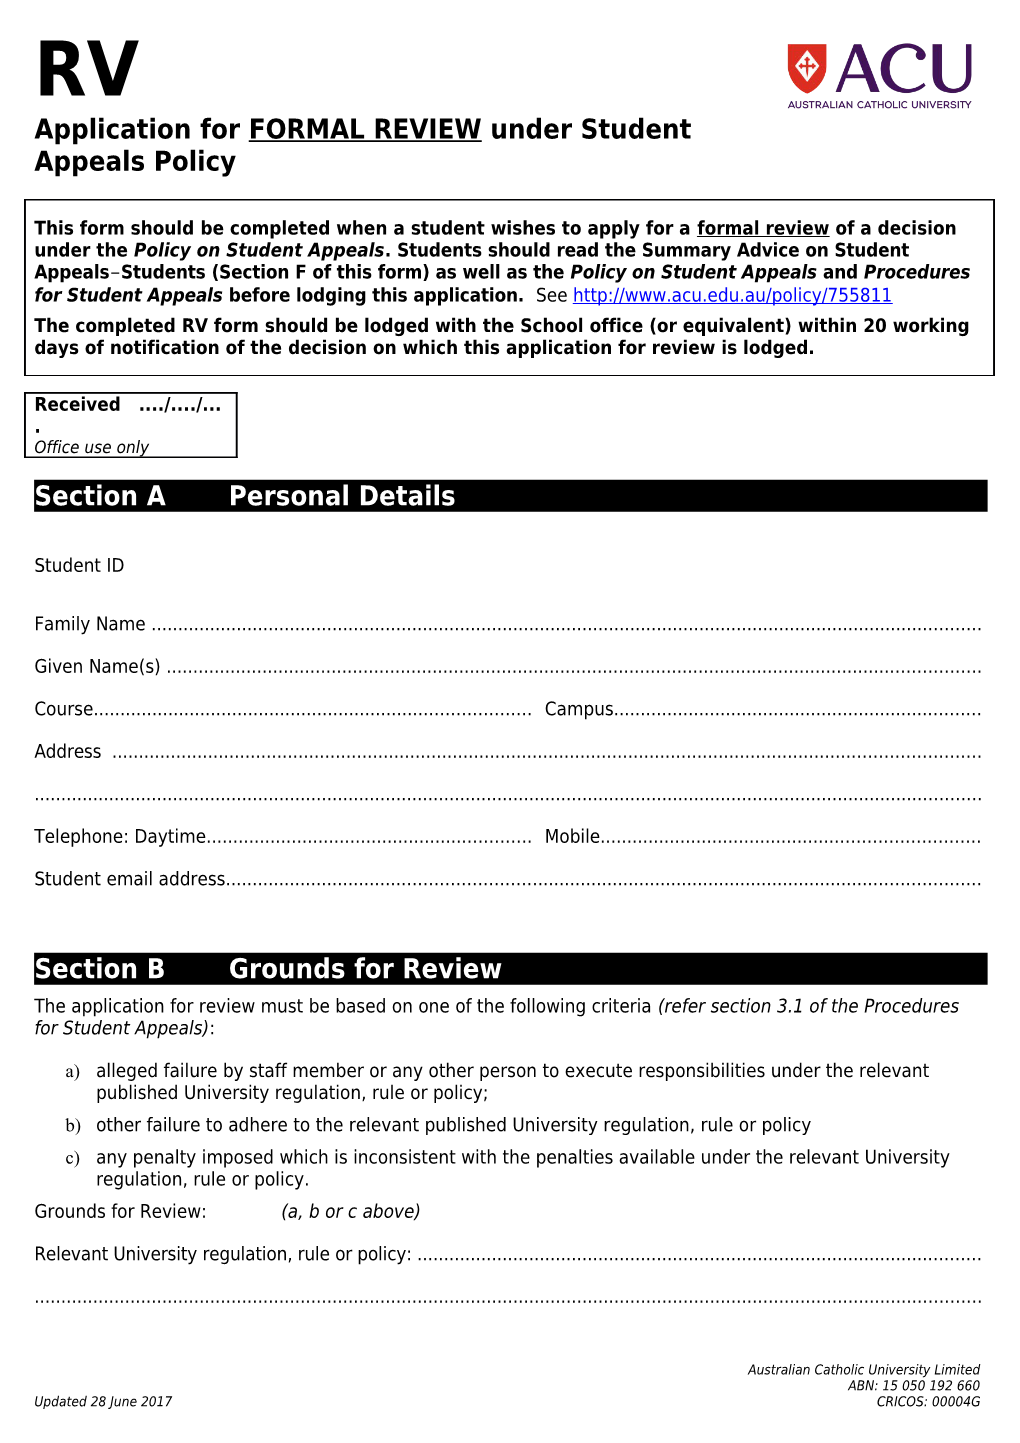 RV Form - Application for Review